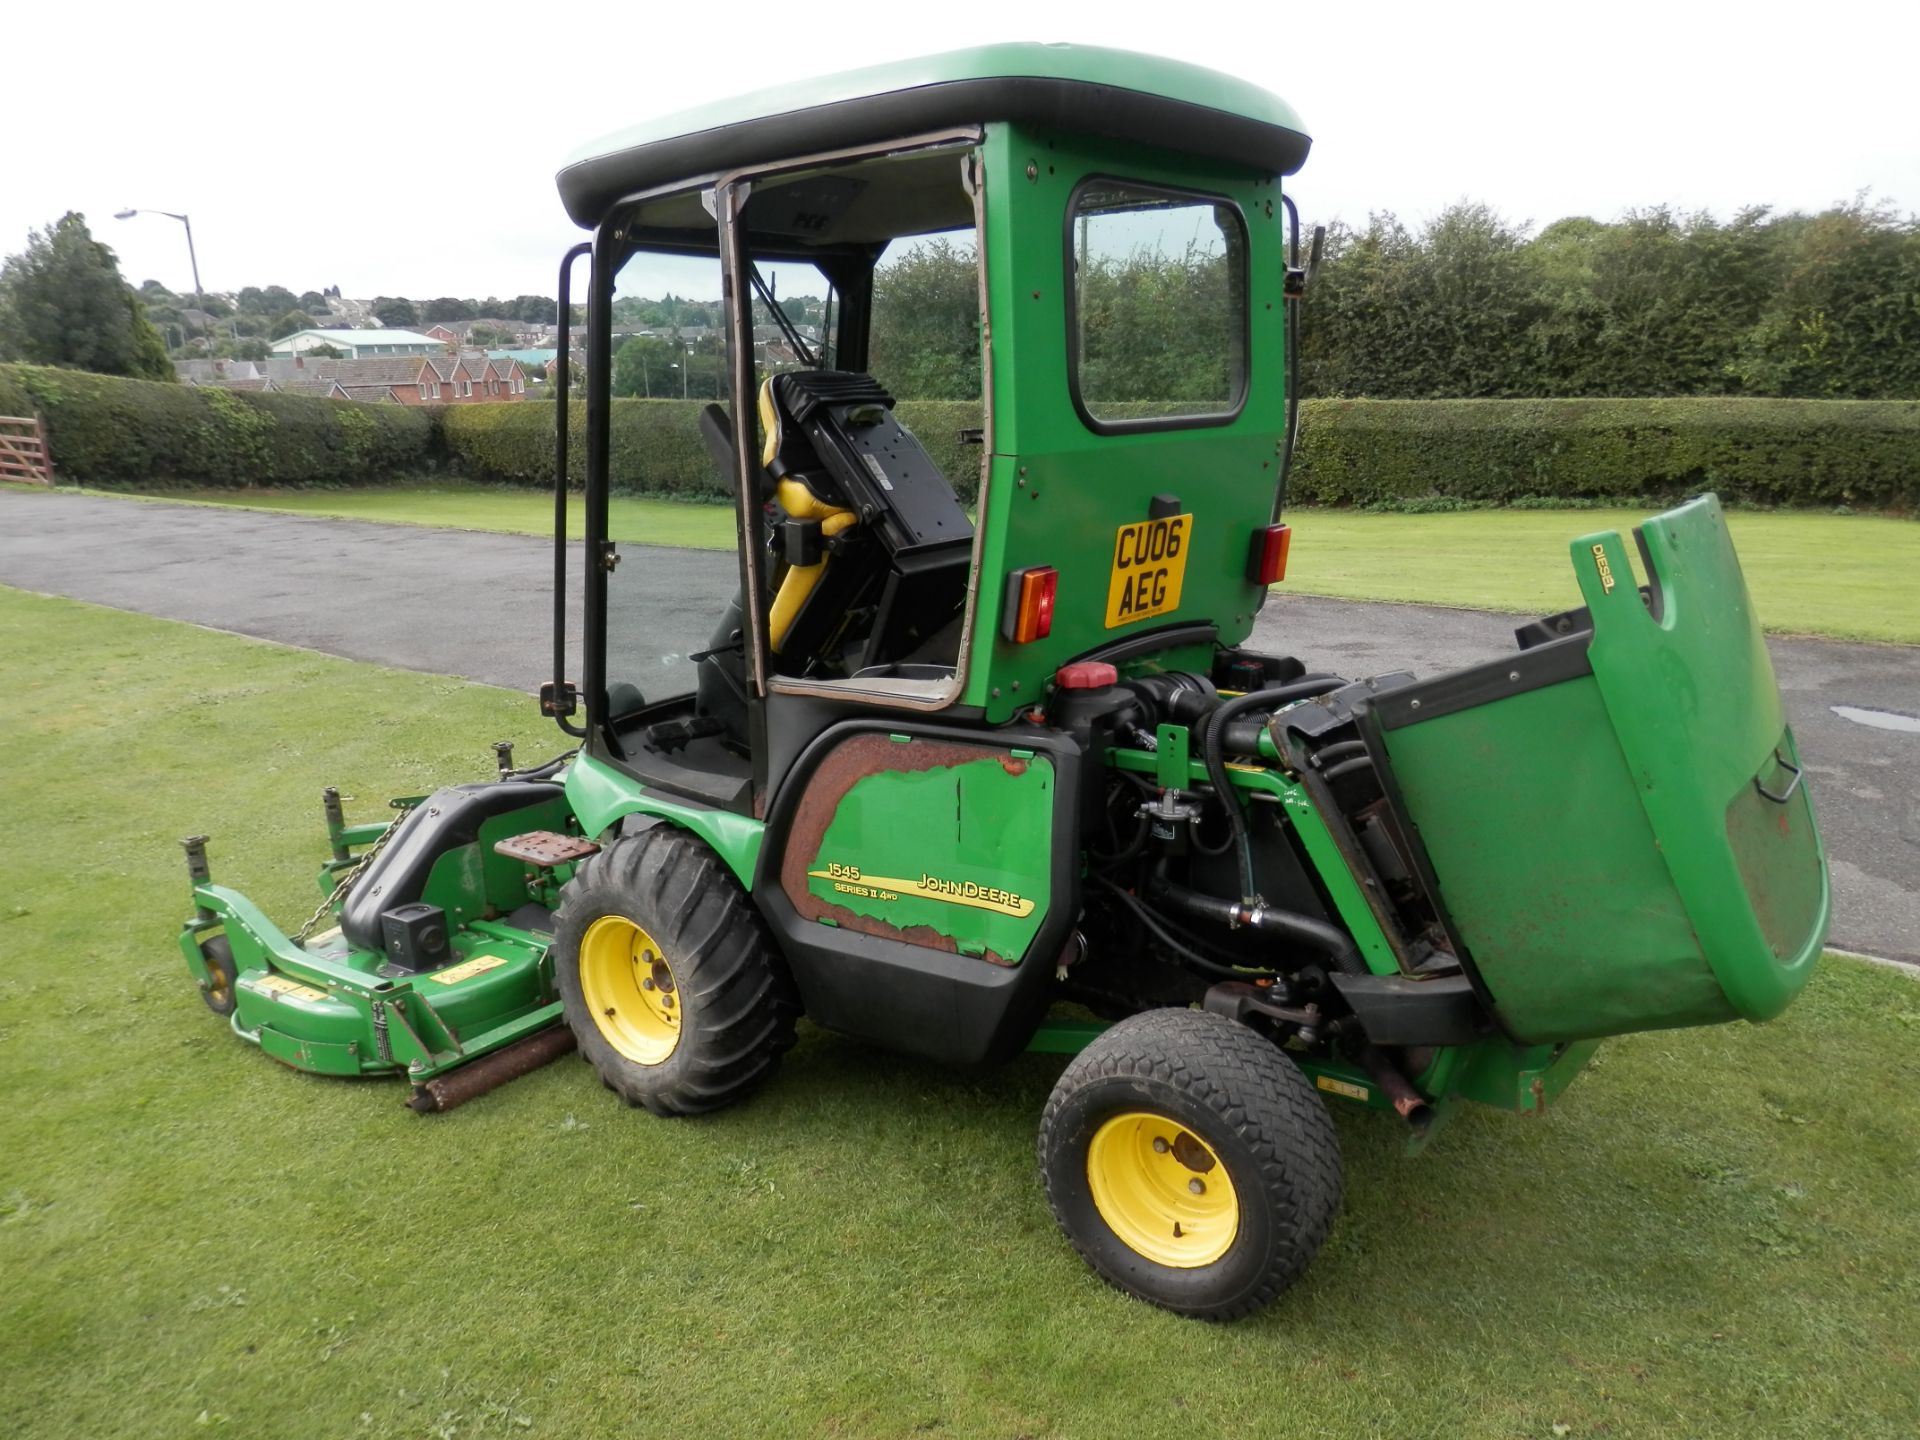 2006 JOHN DEERE 1545 SERIES 2 FRONT DECK 3 BLADE ROTARY MOWER, WIDE CUT AREA FOR LARGE ESTATES. - Image 8 of 15